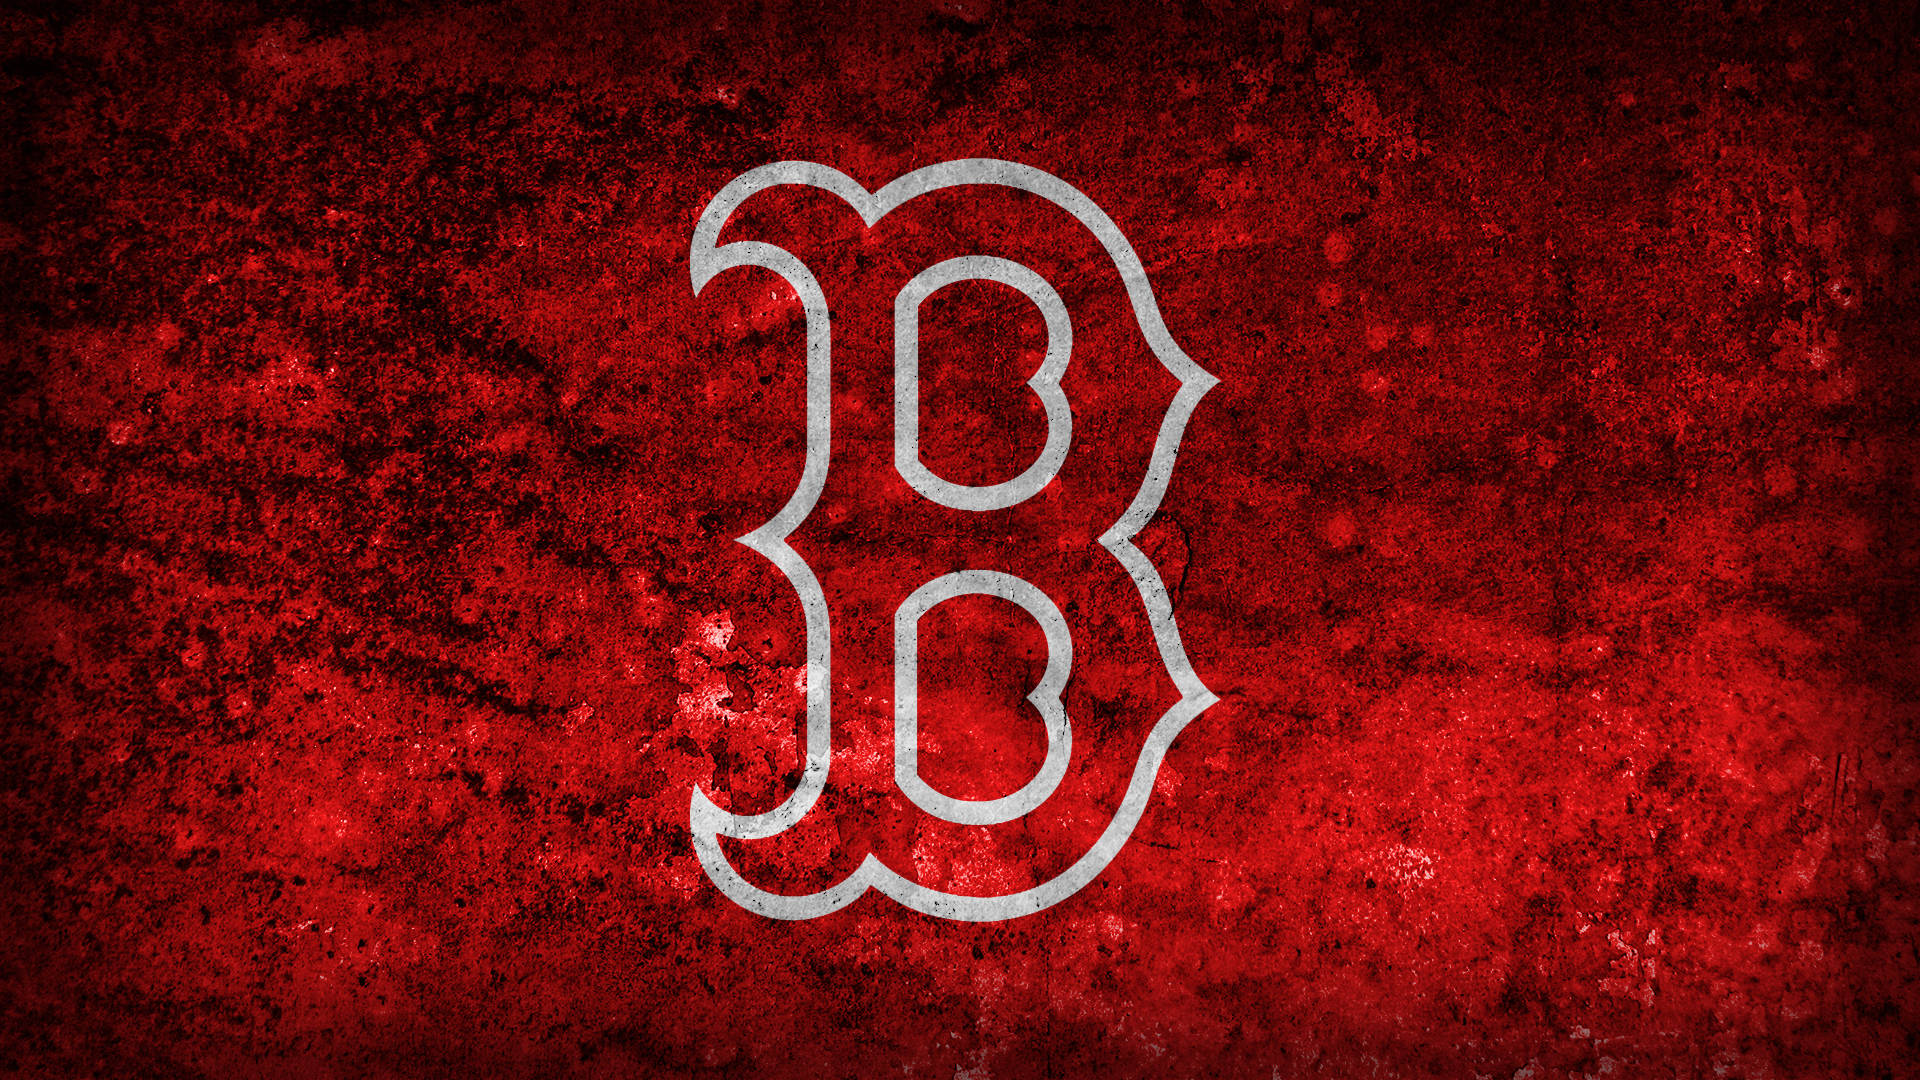 red sox wallpaper 1920x1080 wallpapers